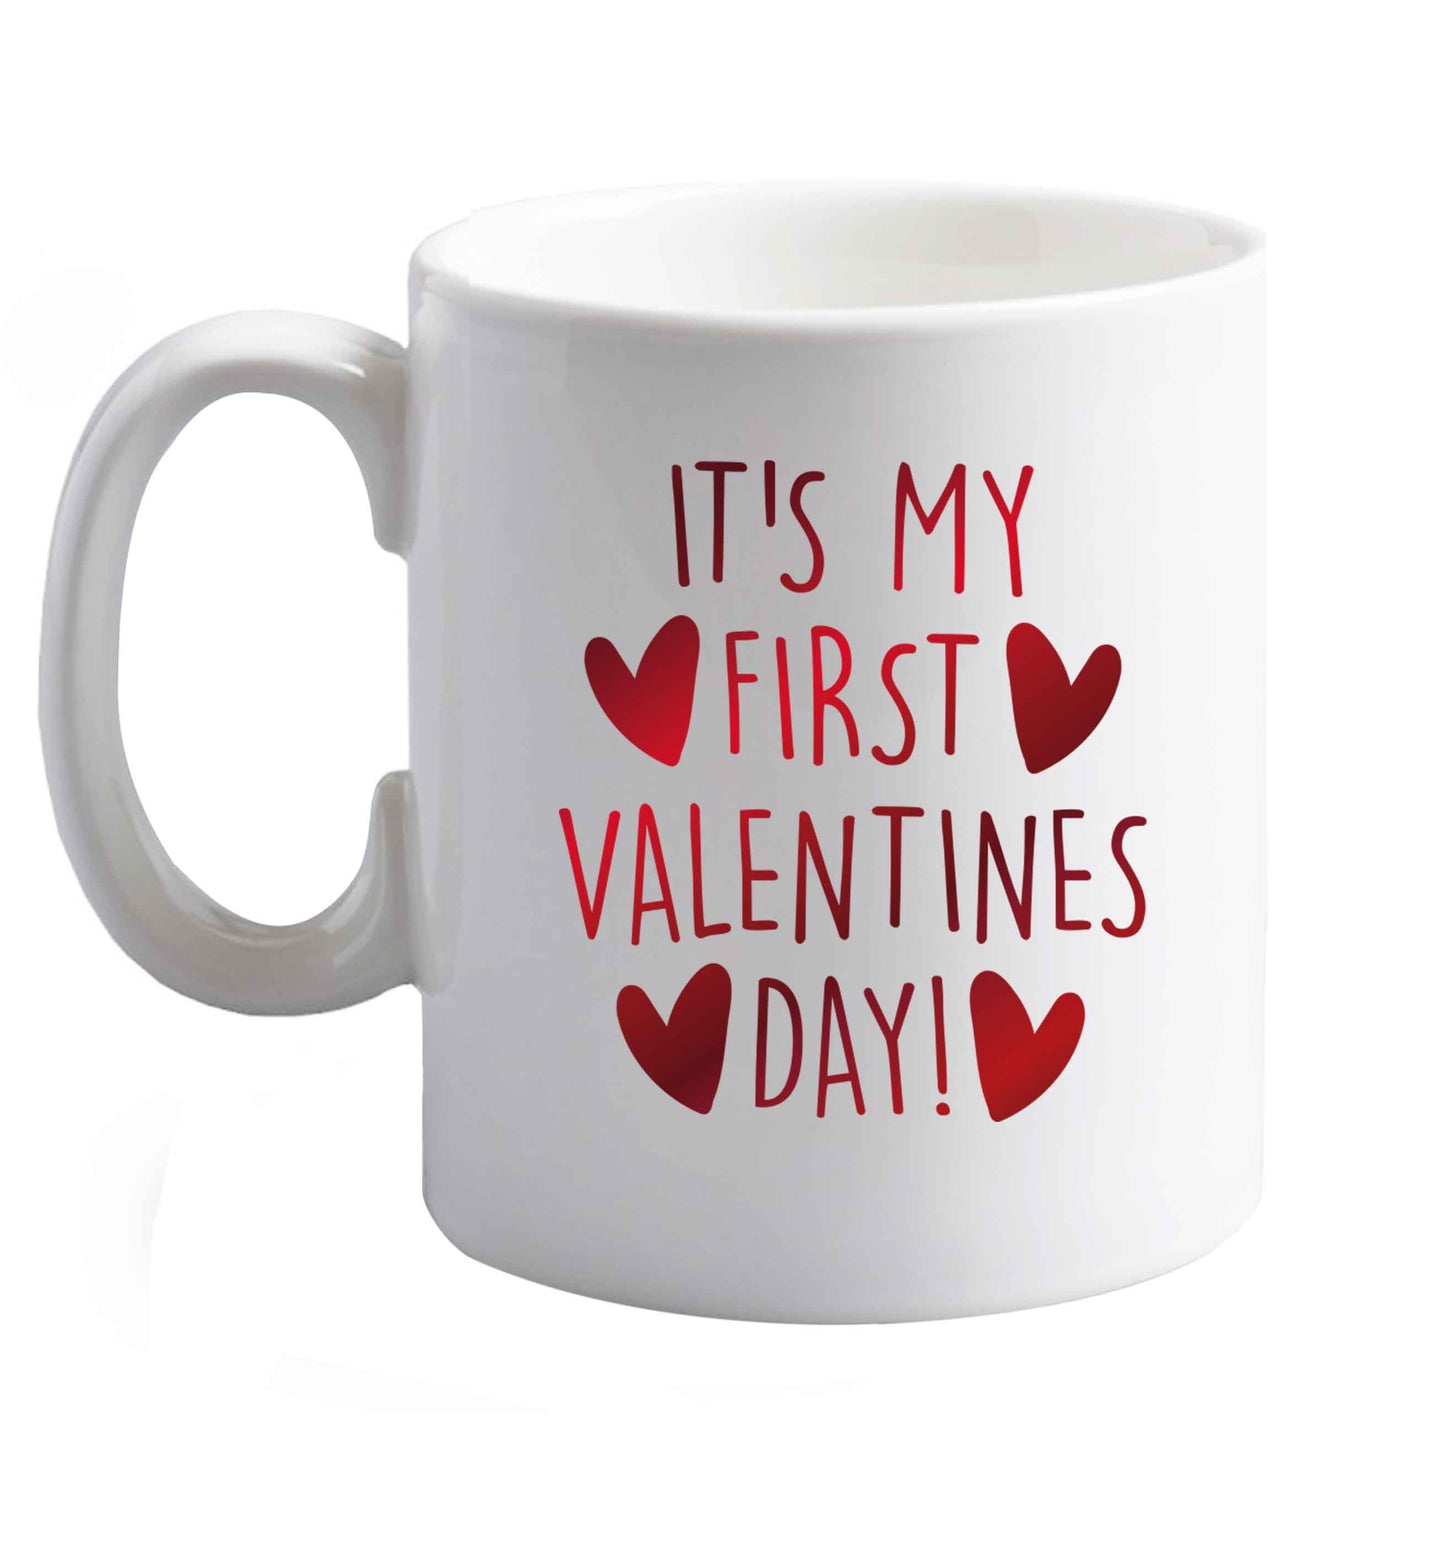 10 oz It's my first valentines day! ceramic mug right handed